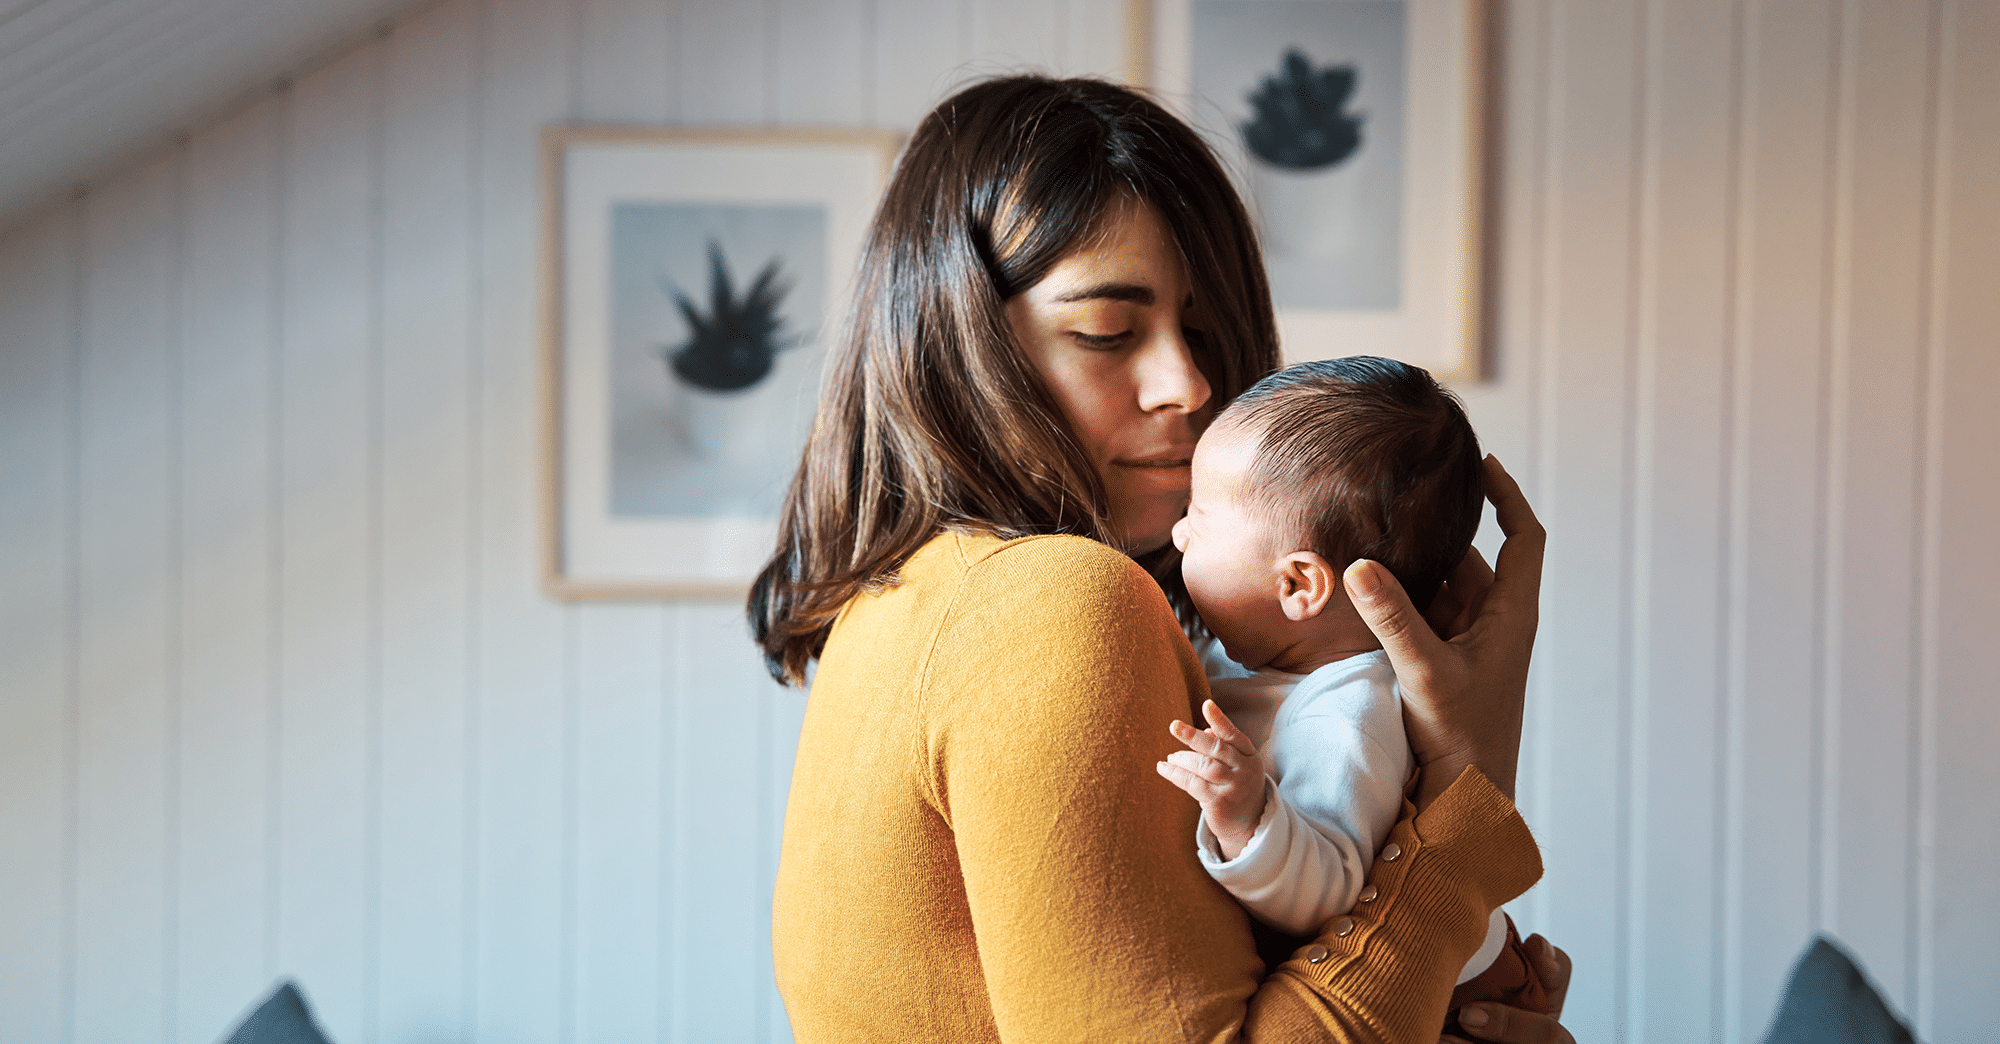 Where to Find Support and Help for Breastfeeding Struggles